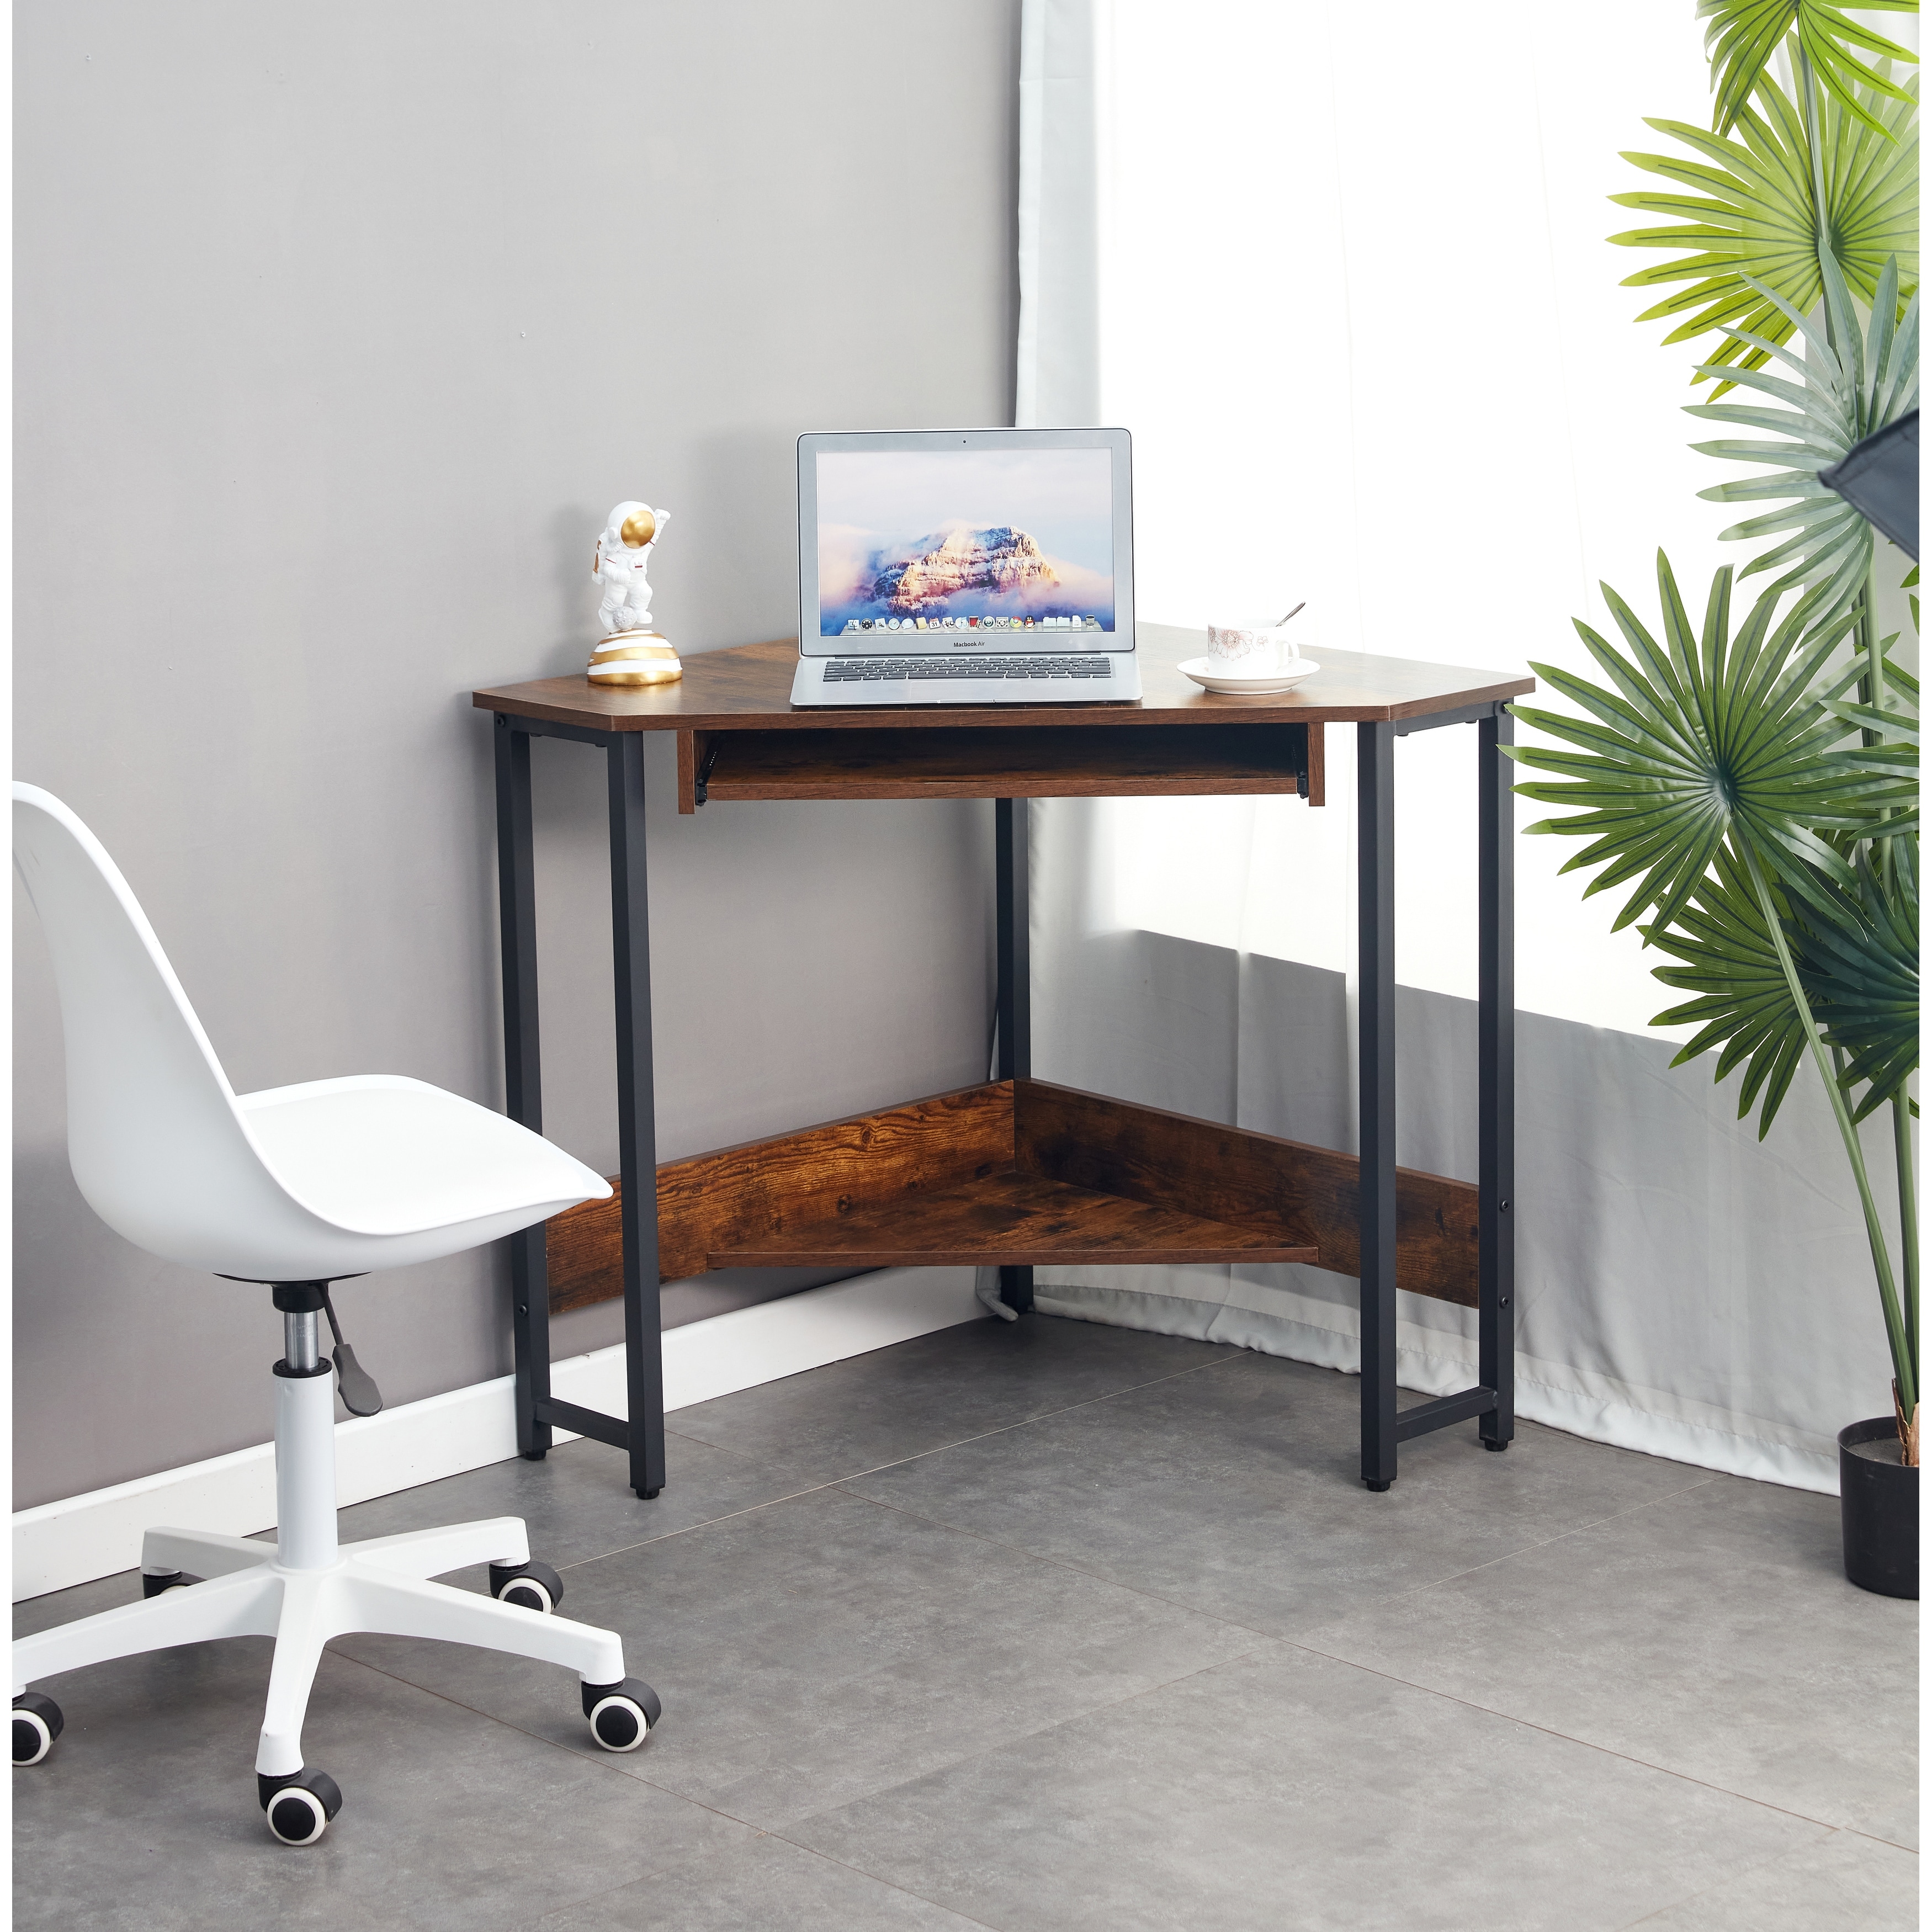 https://ak1.ostkcdn.com/images/products/is/images/direct/d2f6e6d6fbed9cf85e3a4bcd961ab434a29ee797/Triangle-Computer-Desk-Compact-Home-Office-Workstation-Corner-Desk-with-Smooth-Keyboard-Tray%26Storage-Shelf-for-Small-Space.jpg